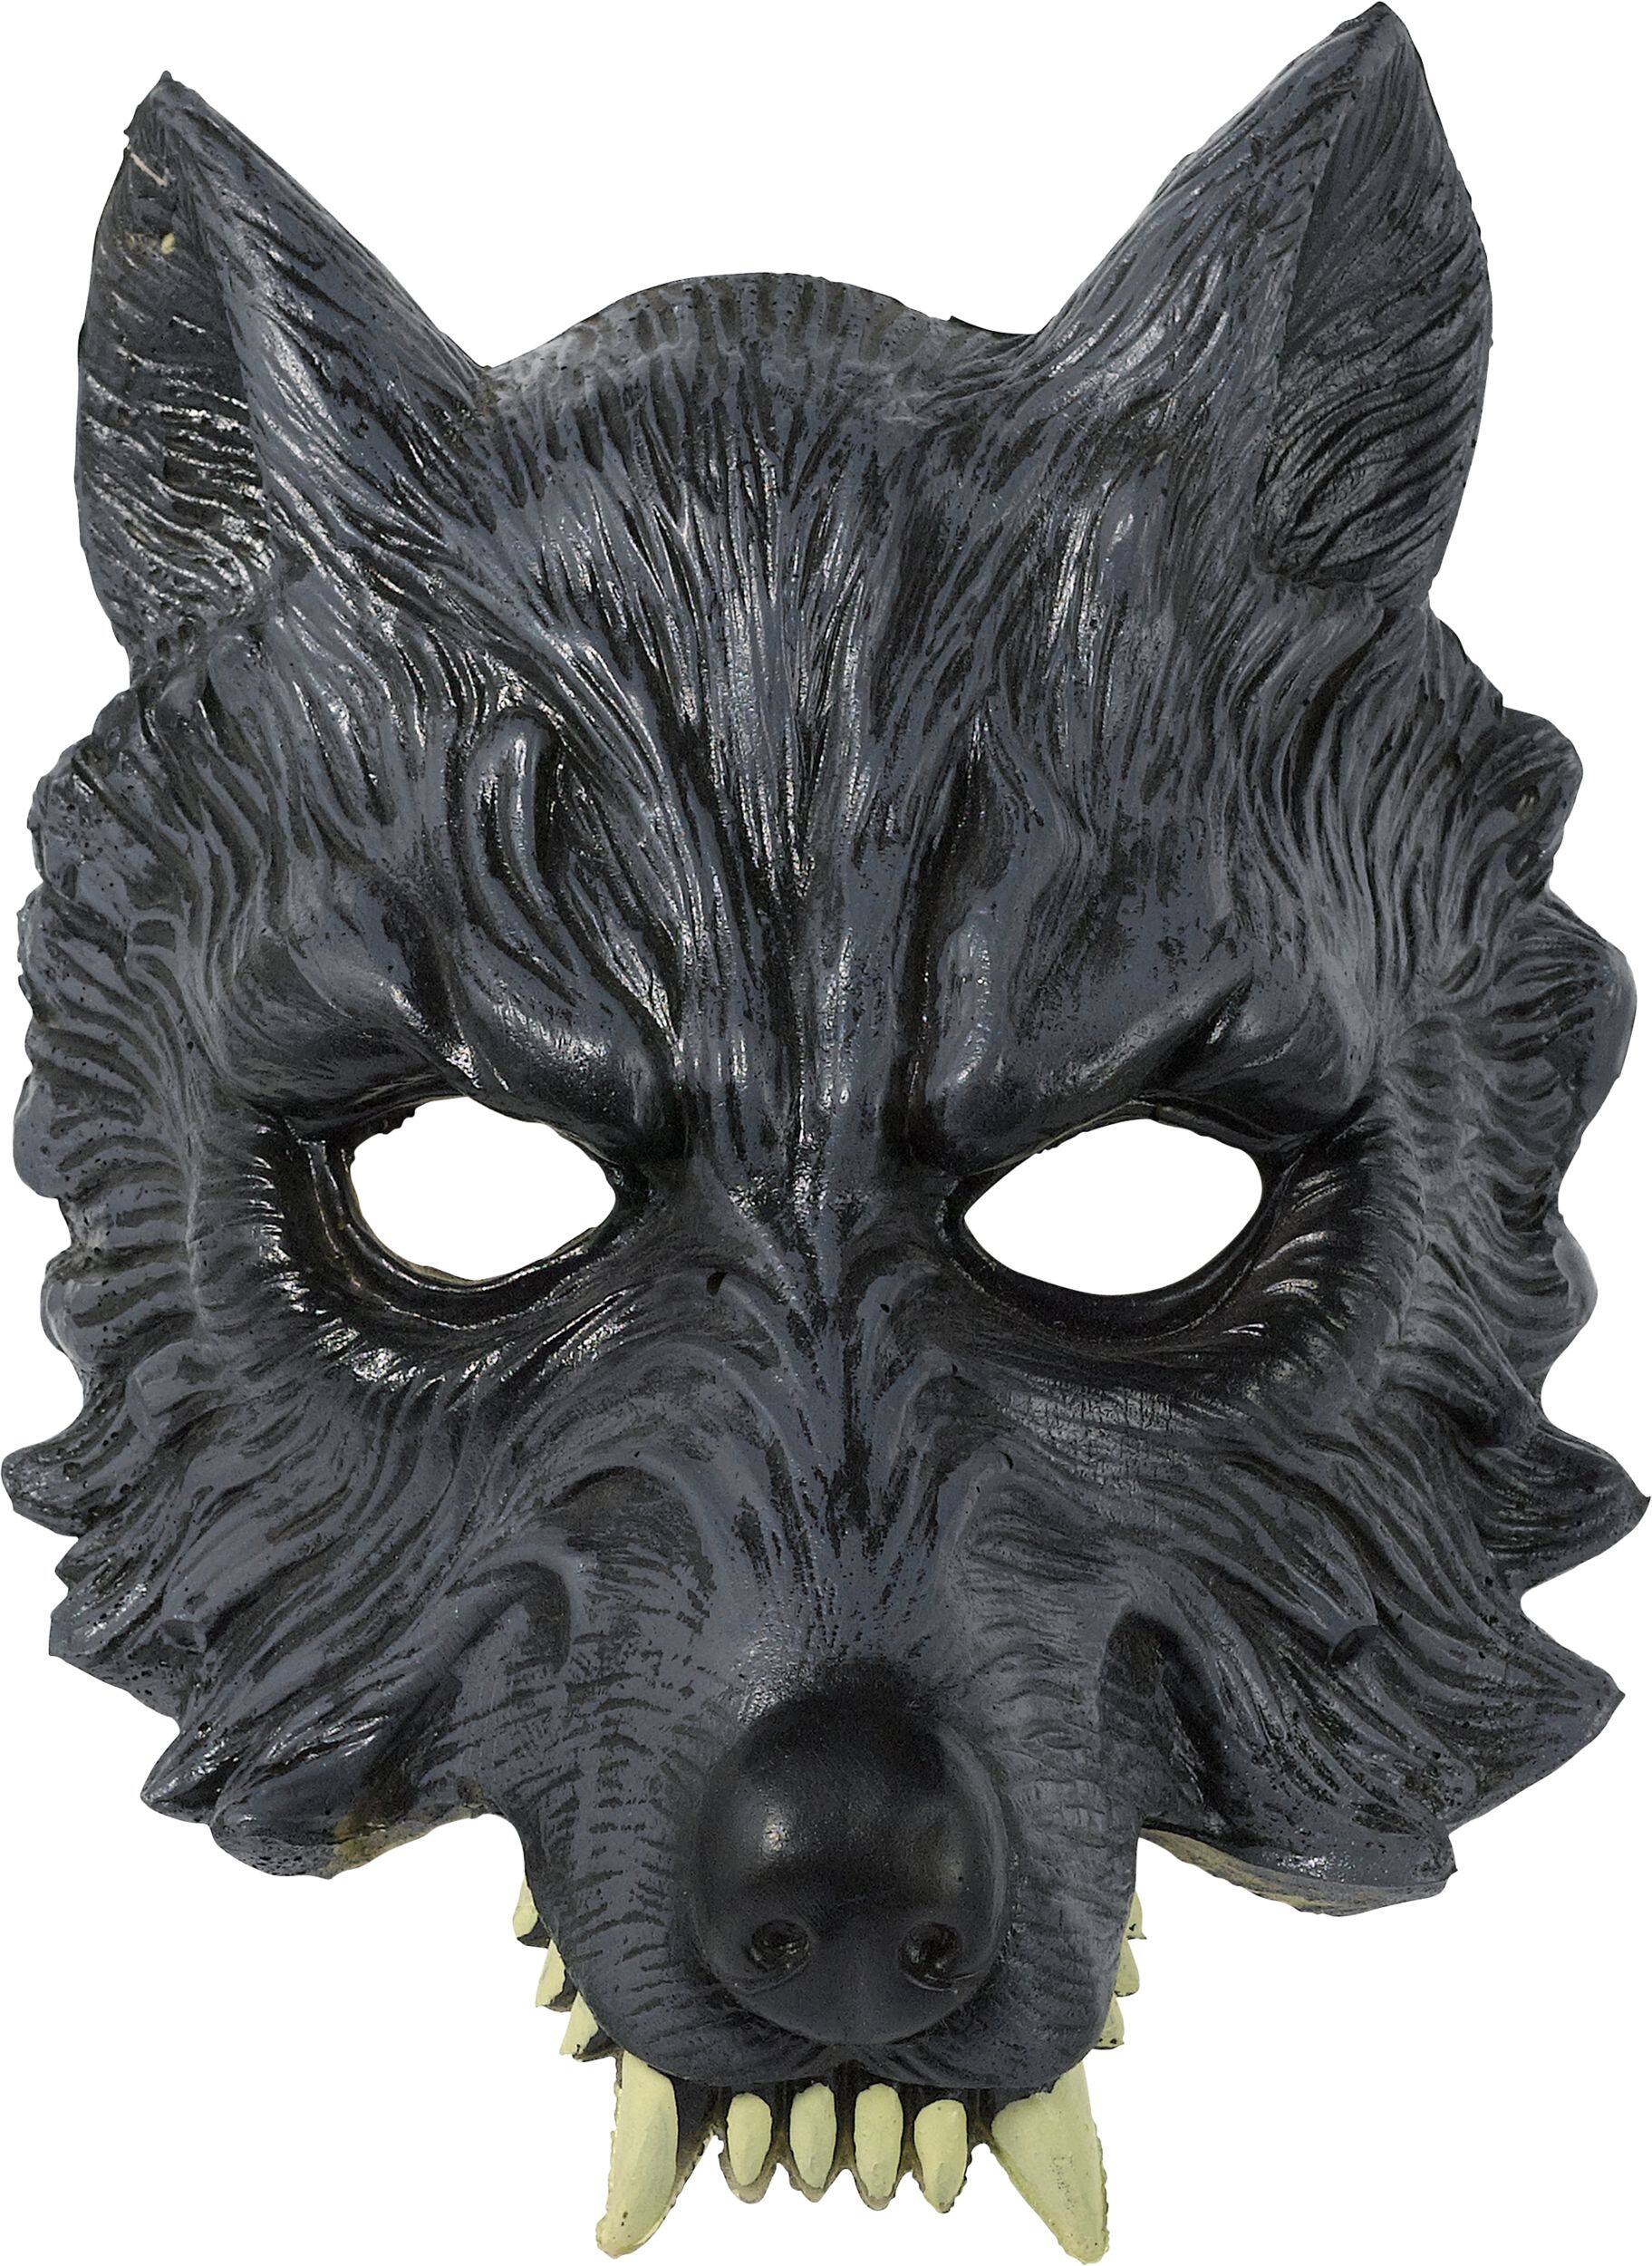 Werewolf Half Face Mask, Black, One Size, Wearable Costume Accessory ...